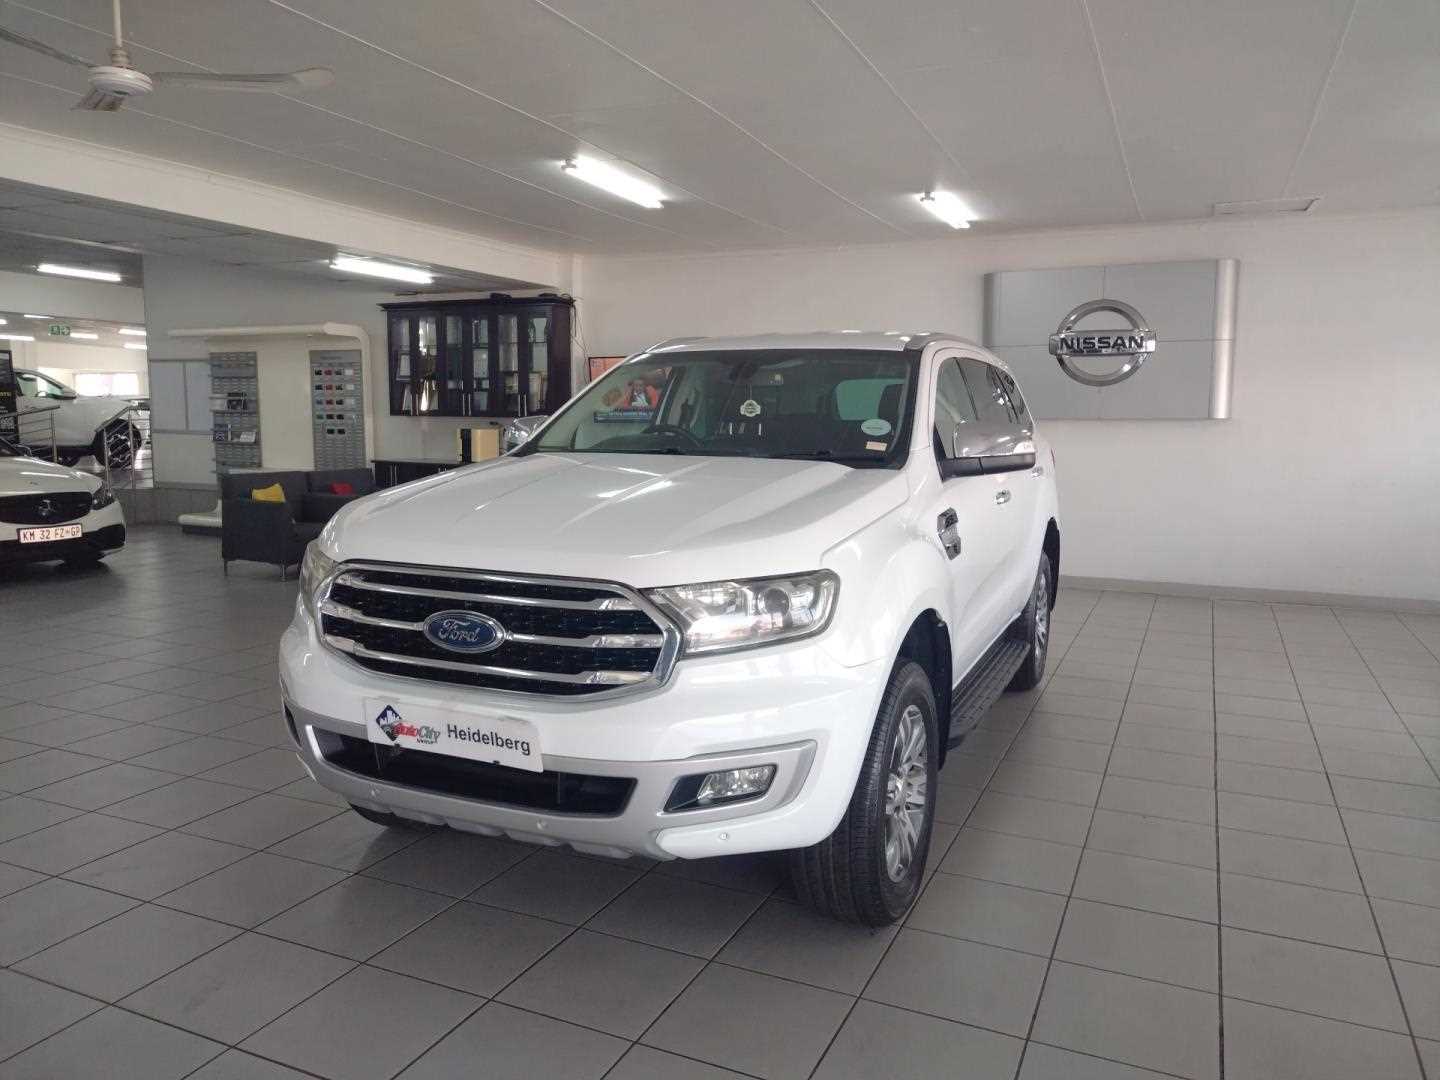 FORD EVEREST 3.2 TDCi XLT 4X4 A/T for Sale in South Africa